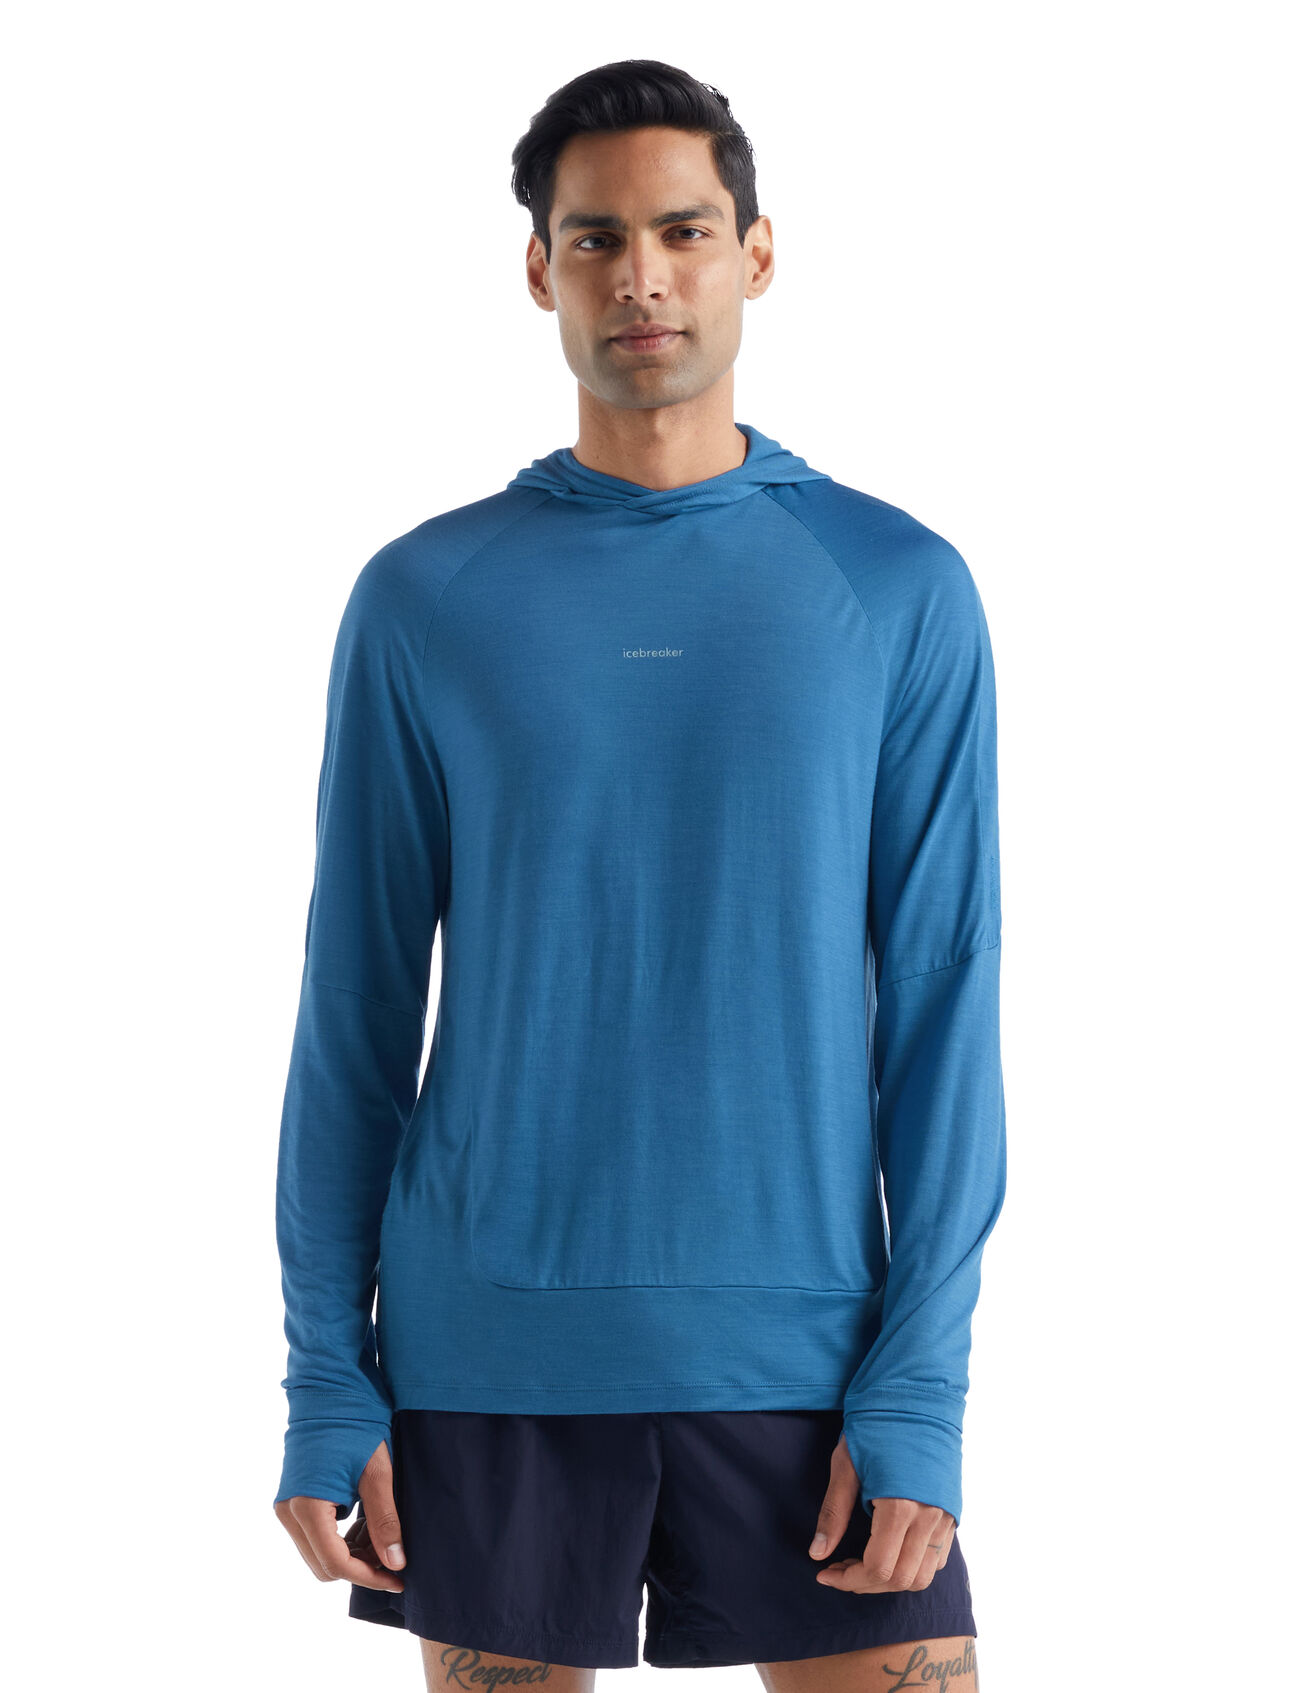 Mens Cool-Lite™ Merino Long Sleeve Hoodie A lightweight and breathable performance hoodie designed for aerobic days outside, the Cool-Lite™ Hoodie features our moisture-wicking Cool-Lite™ merino jersey fabric.